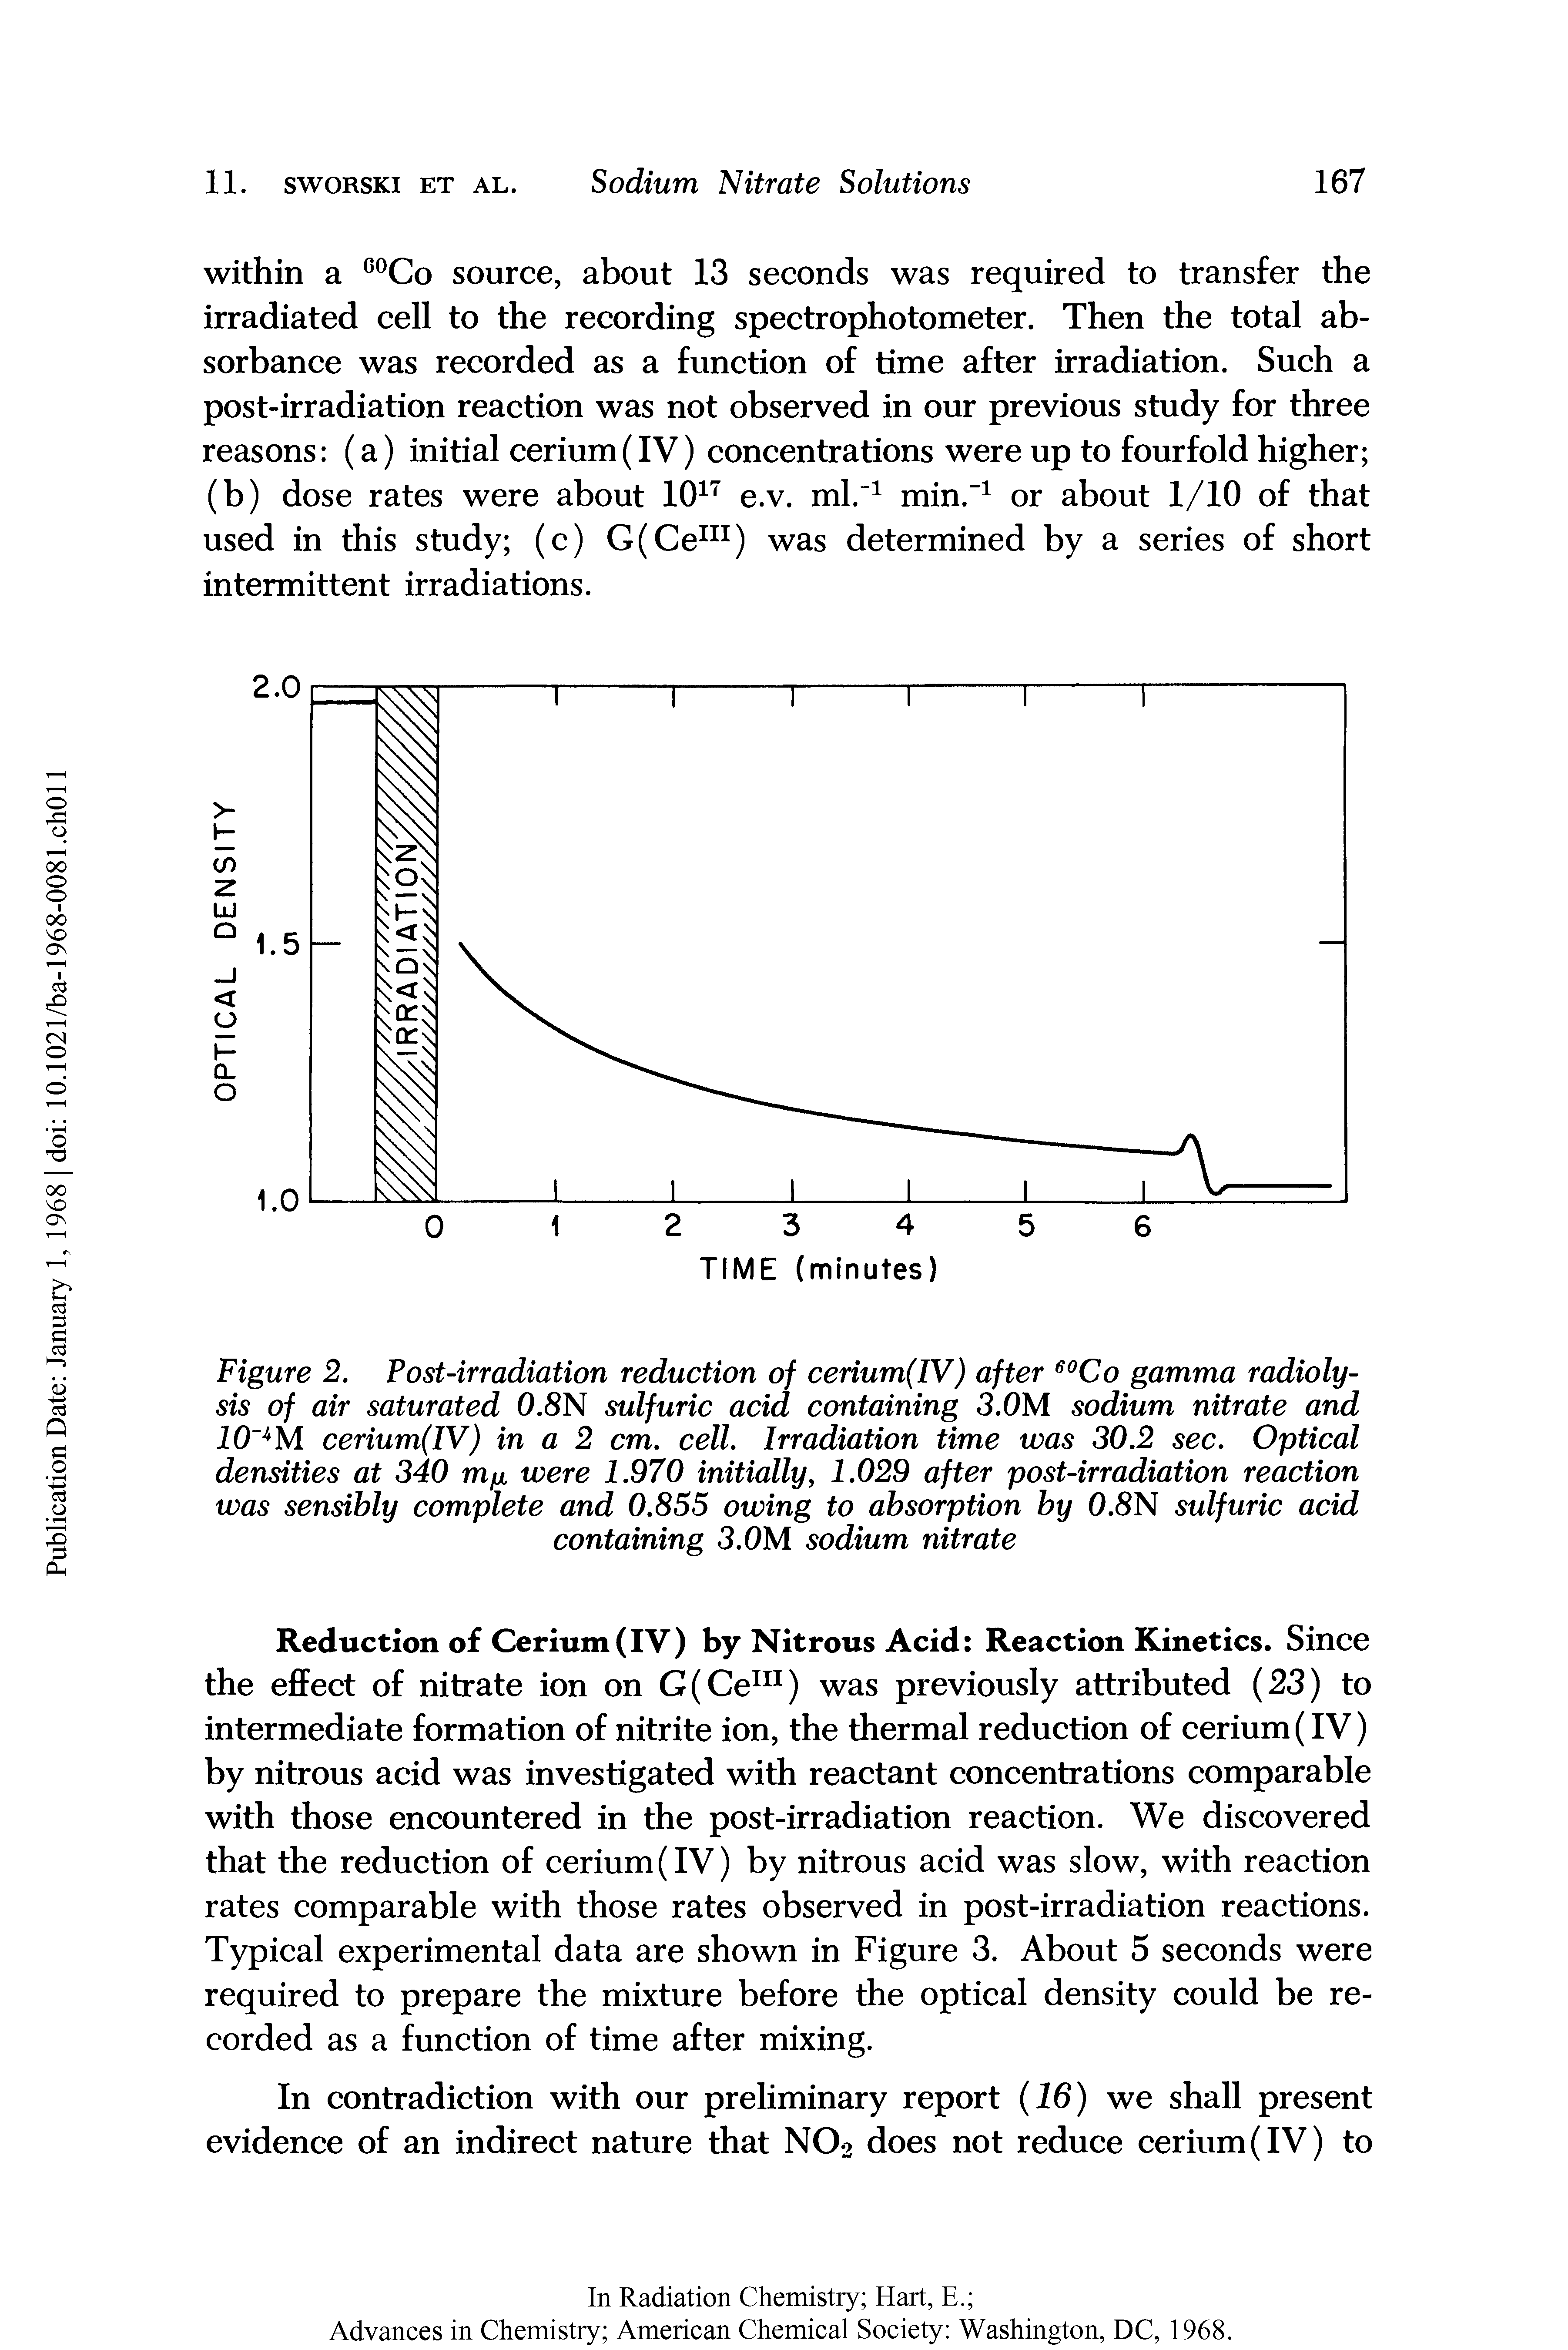 Figure 2. Post-irradiation reduction of cerium(IV) after 60Co gamma radiolysis of air saturated 0.8N sulfuric acid containing 3.0M sodium nitrate and 10 M cerium(IV) in a 2 cm. cell. Irradiation time was 30.2 sec. Optical densities at 340 m were 1.970 initially, 1.029 after post-irradiation reaction was sensibly complete and 0.855 owing to absorption by 0.8N sulfuric acid containing 3.0M sodium nitrate...